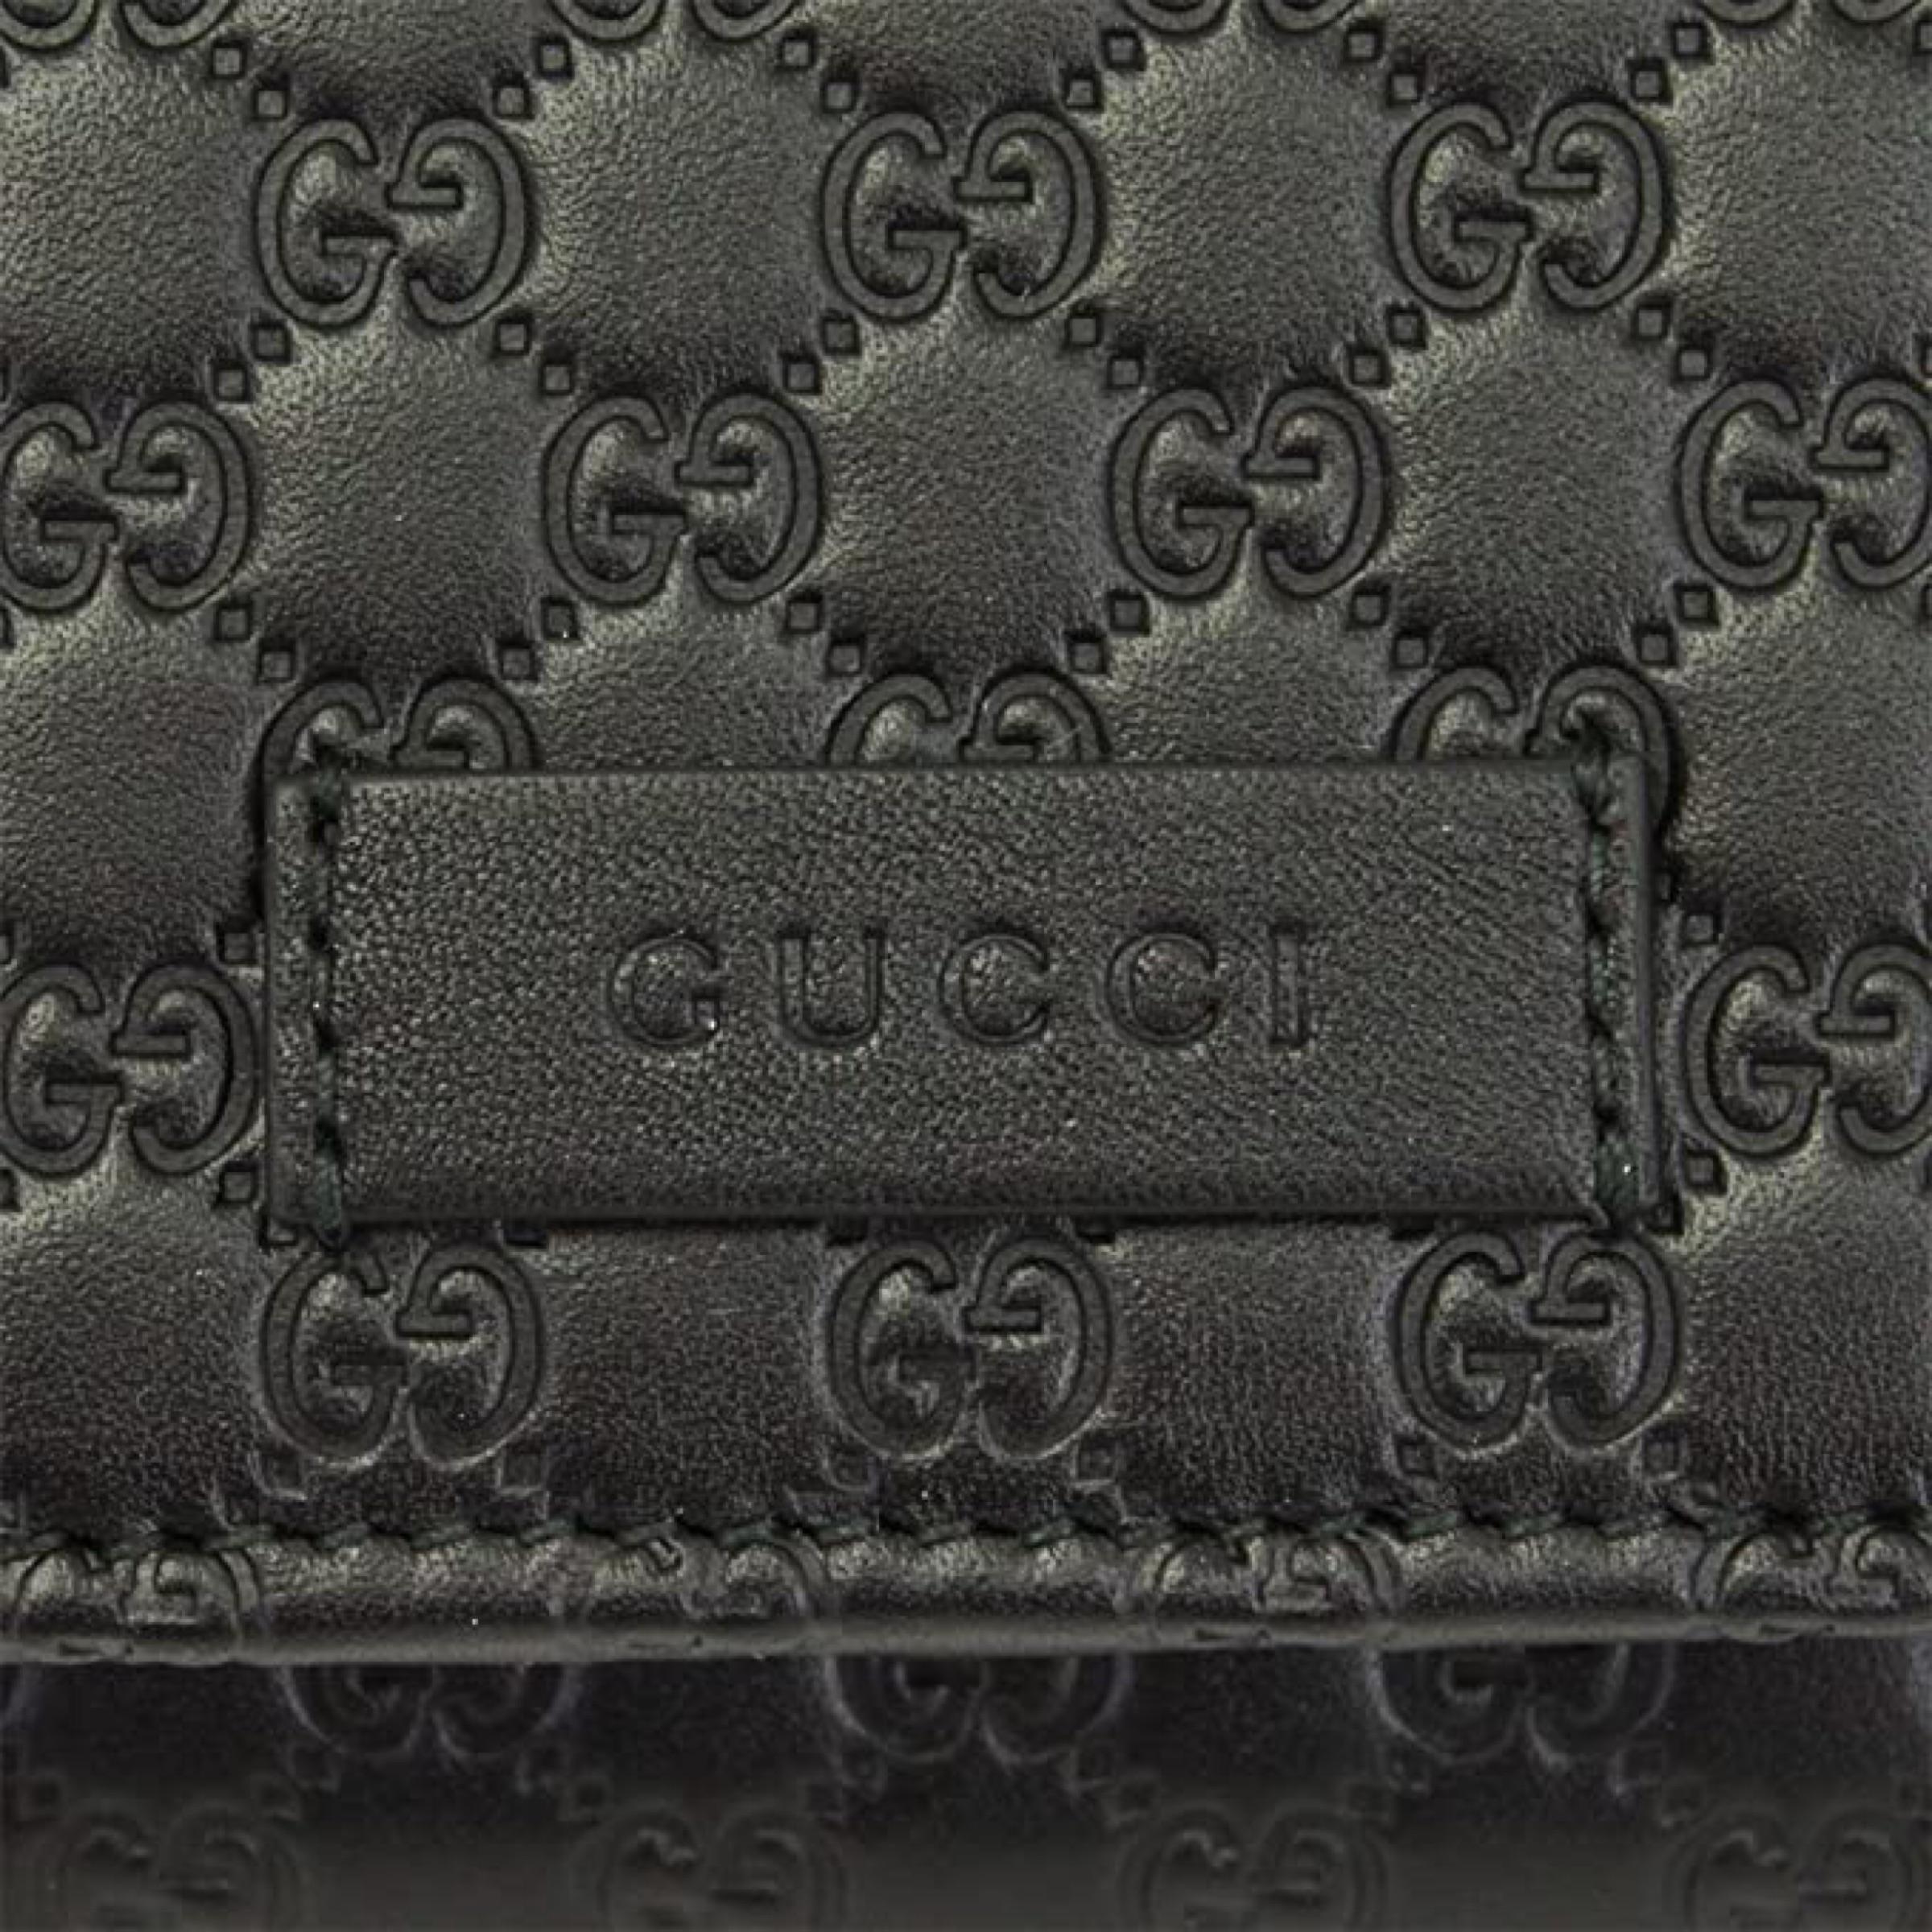 NEW Gucci Black GG Guccissima Monogram Leather Long Wallet Clutch Bag 5